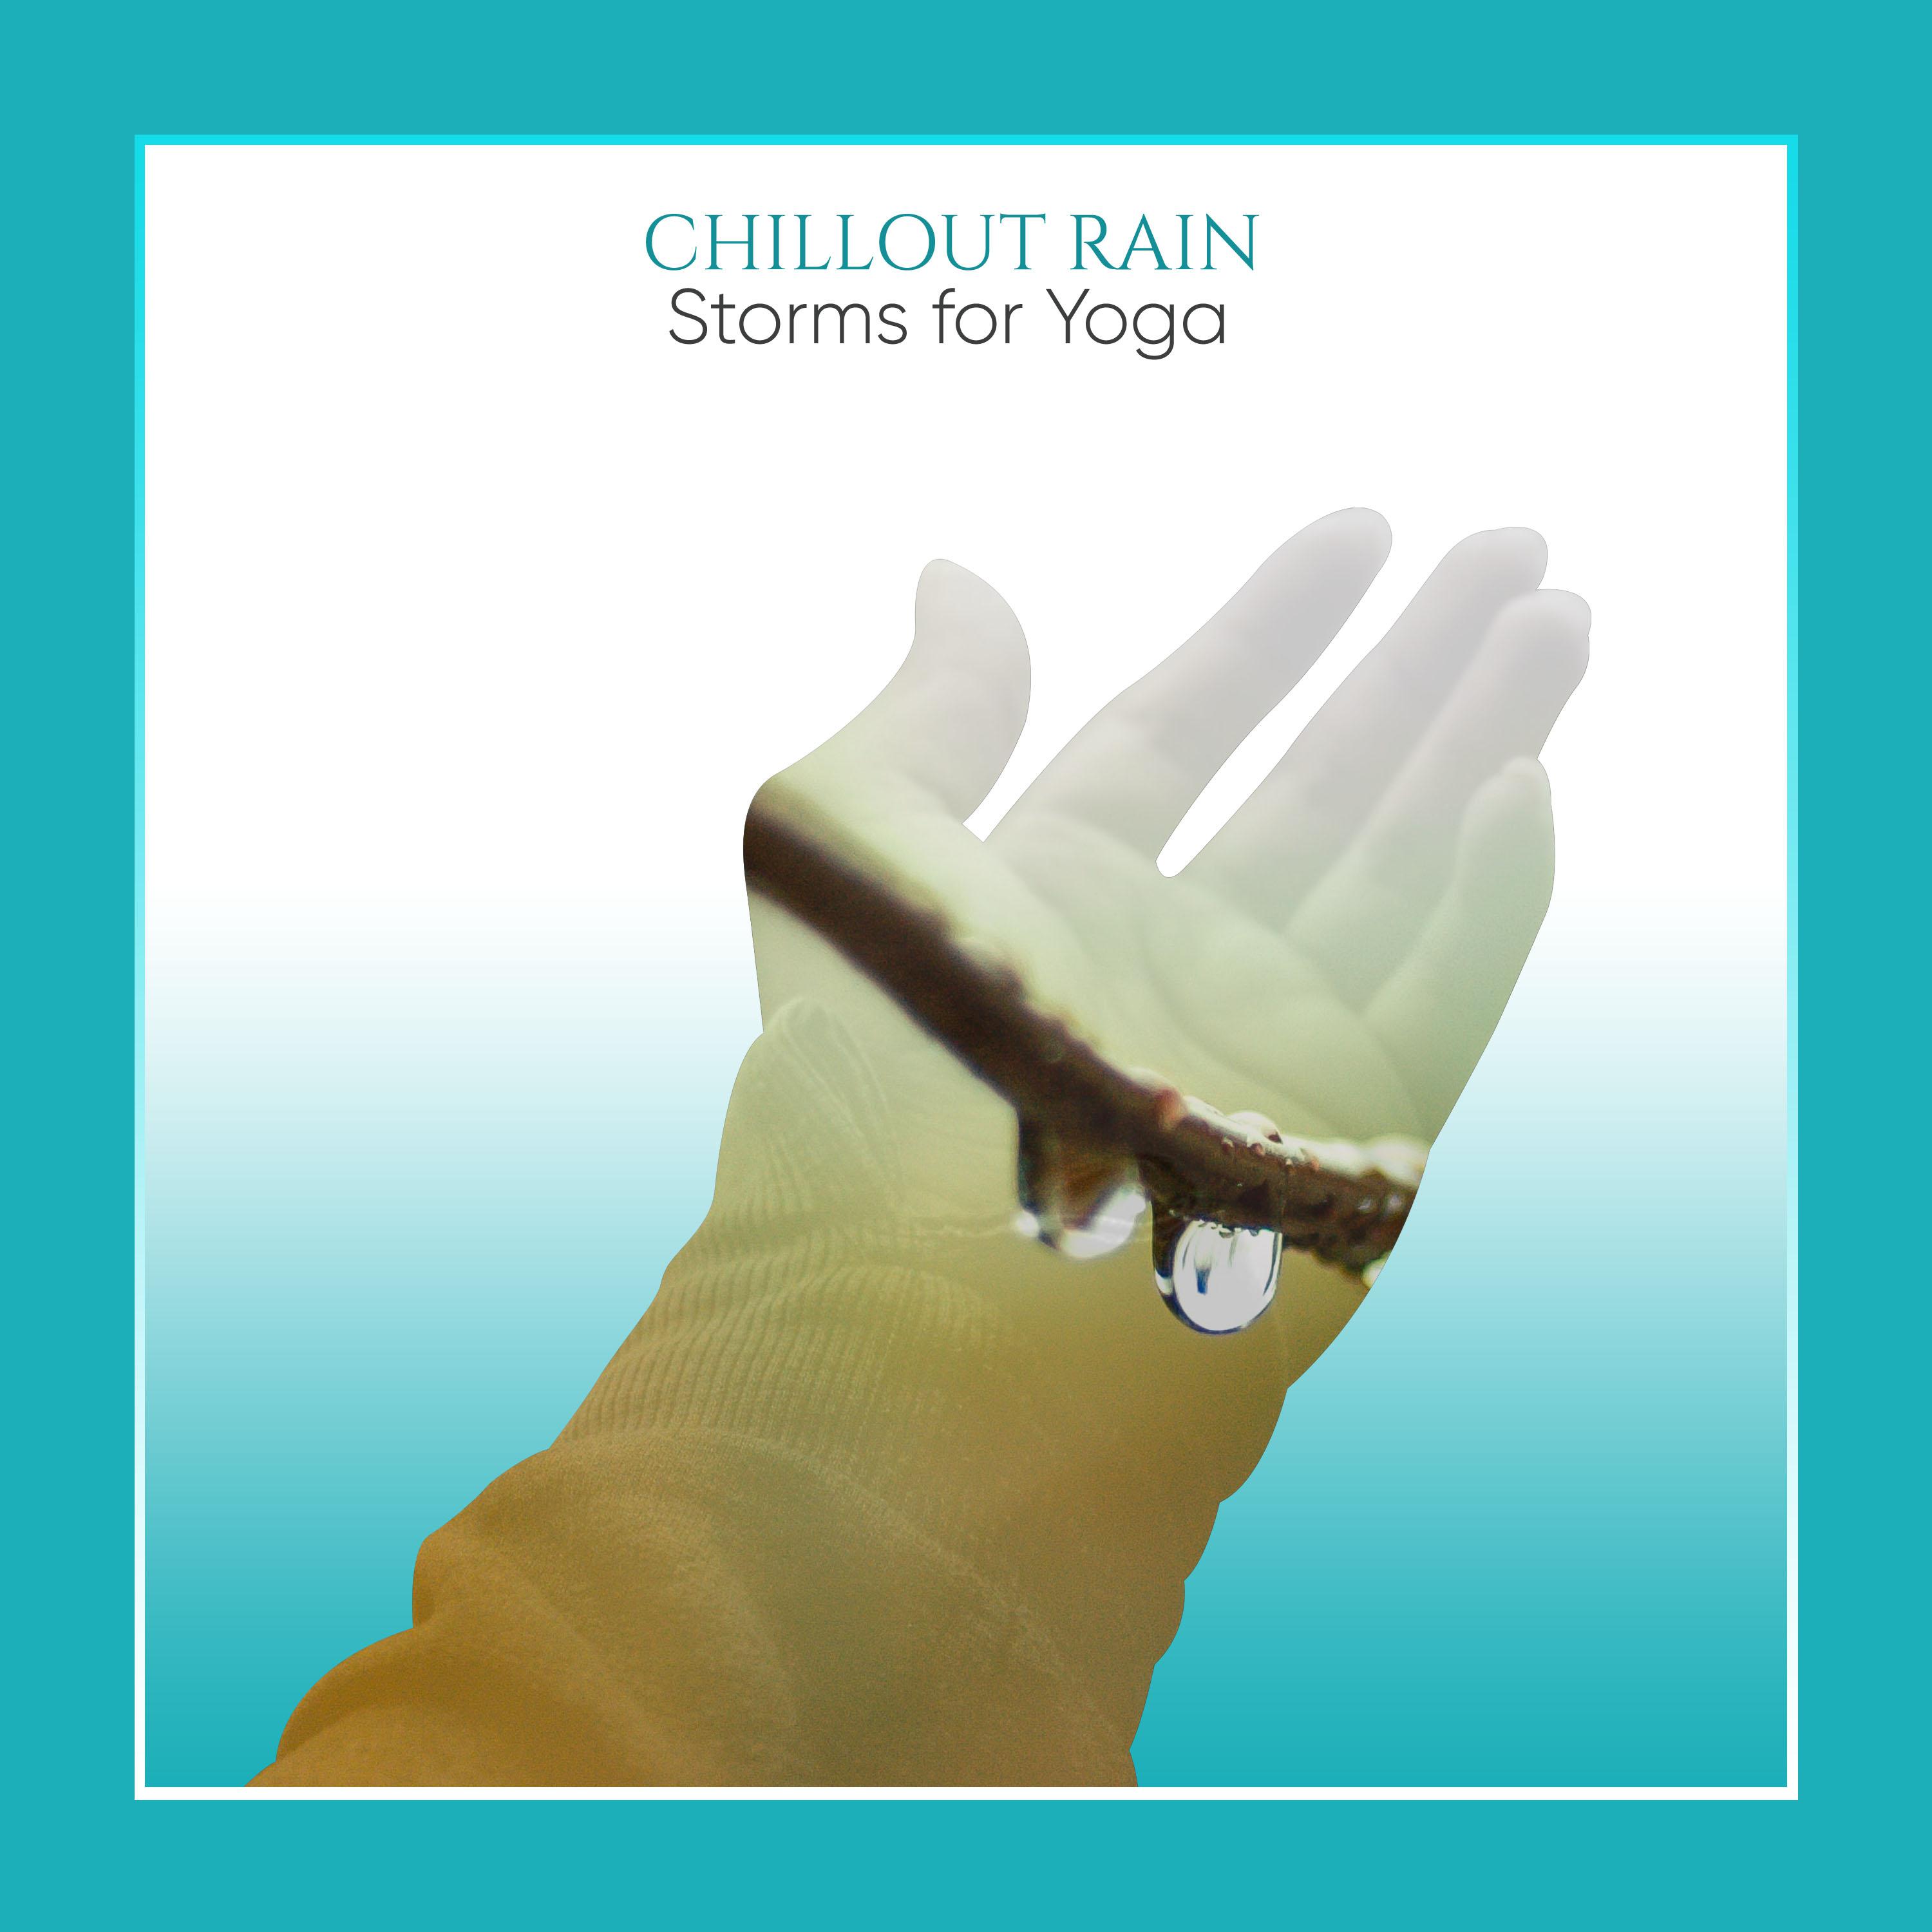 20 Chillout Rain Storms for Yoga